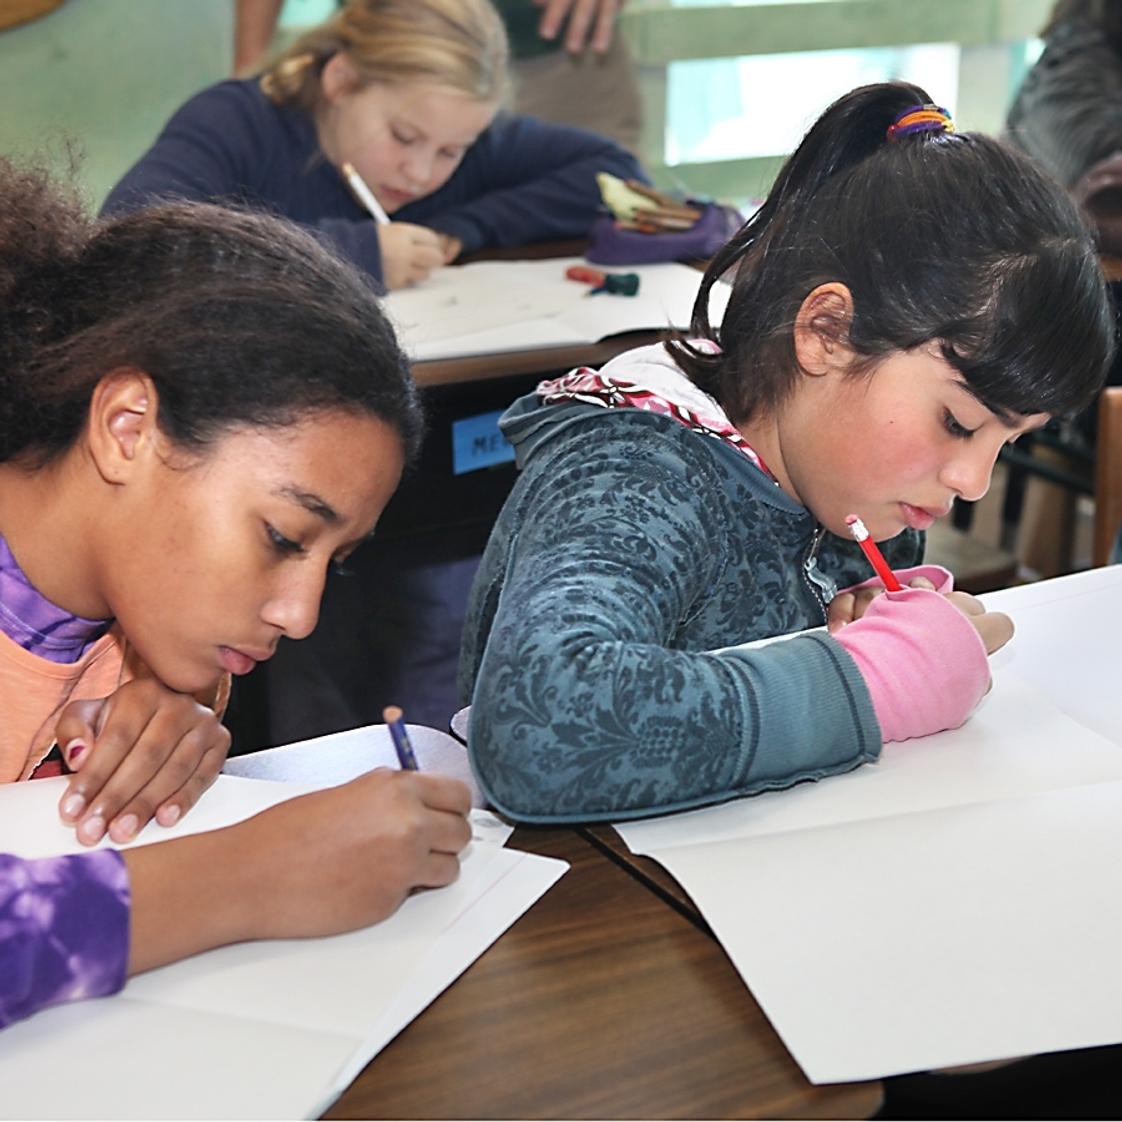 The Waldorf School Of San Diego Photo - Quiet concentration helps us make our academic work accurate and beautiful.